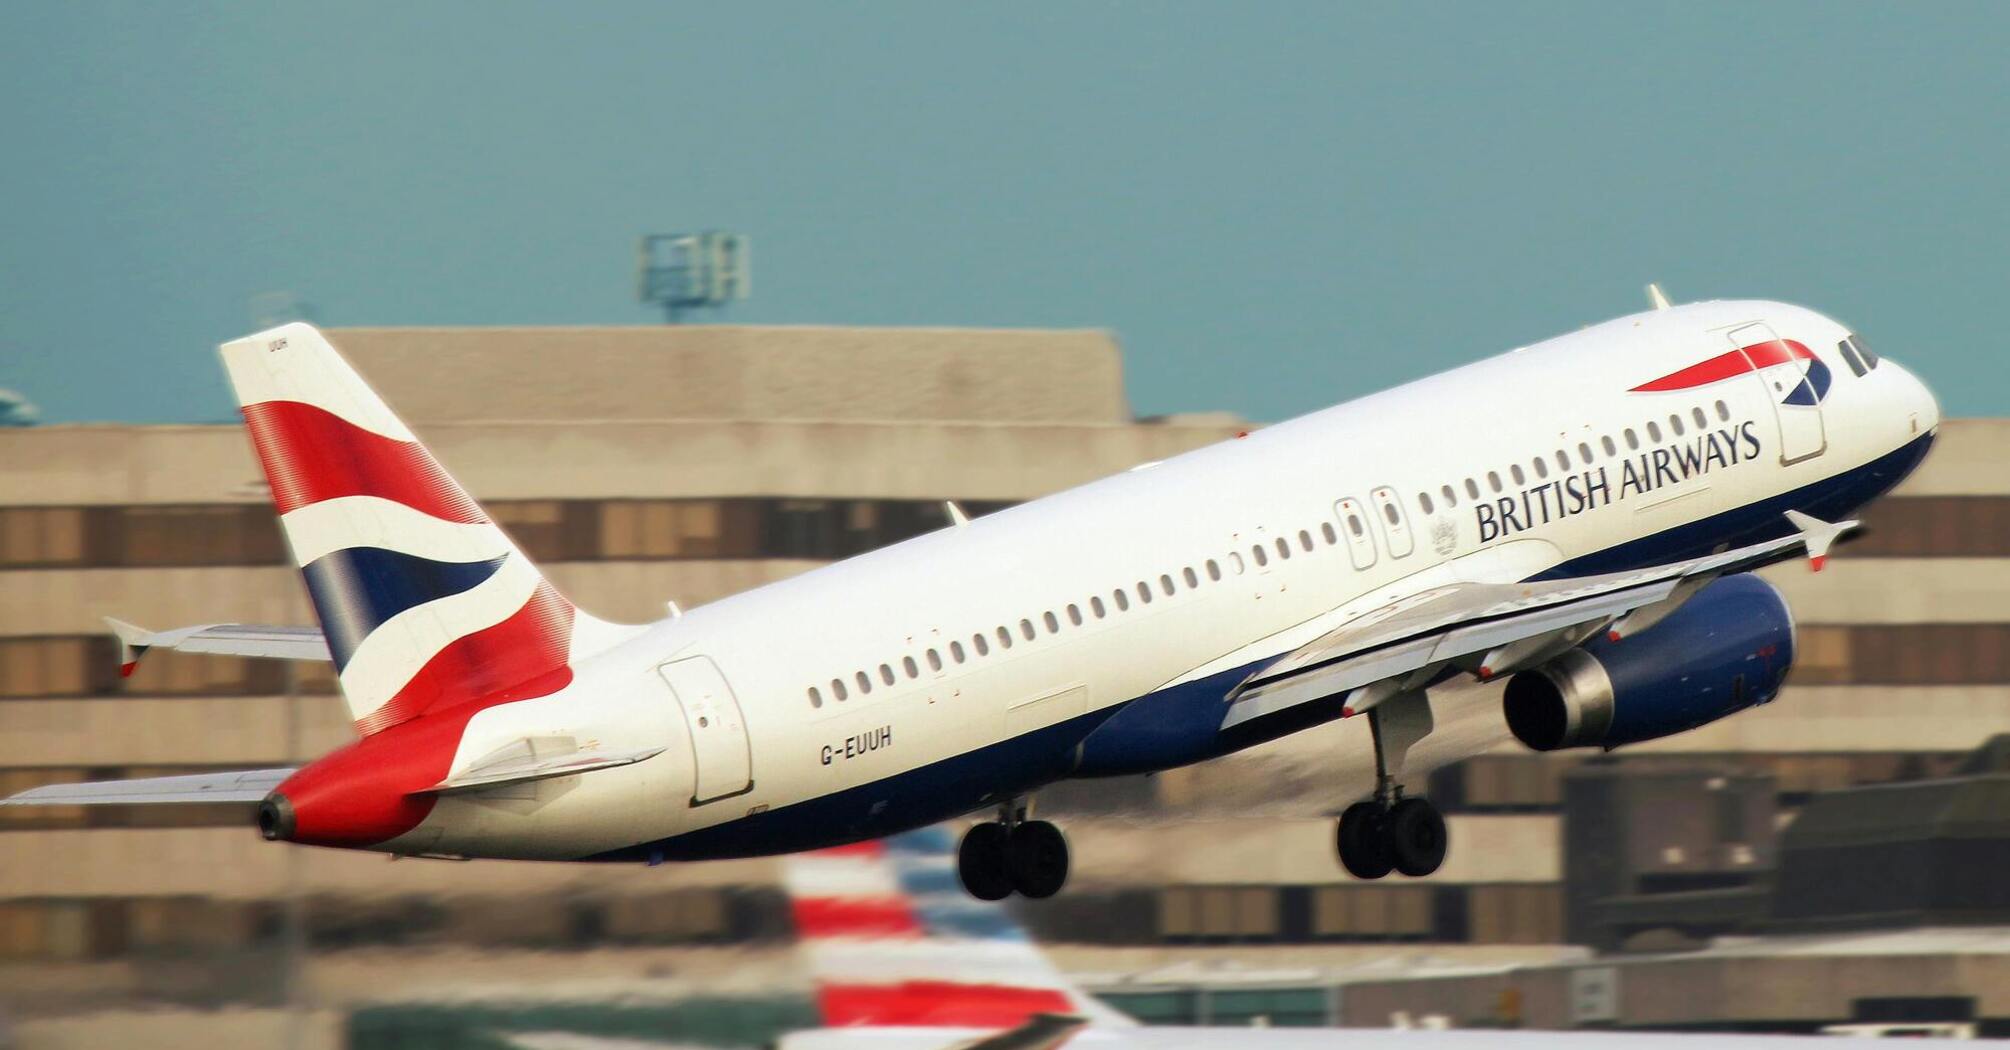 British Airways has postponed the implementation of the pre-order meal system